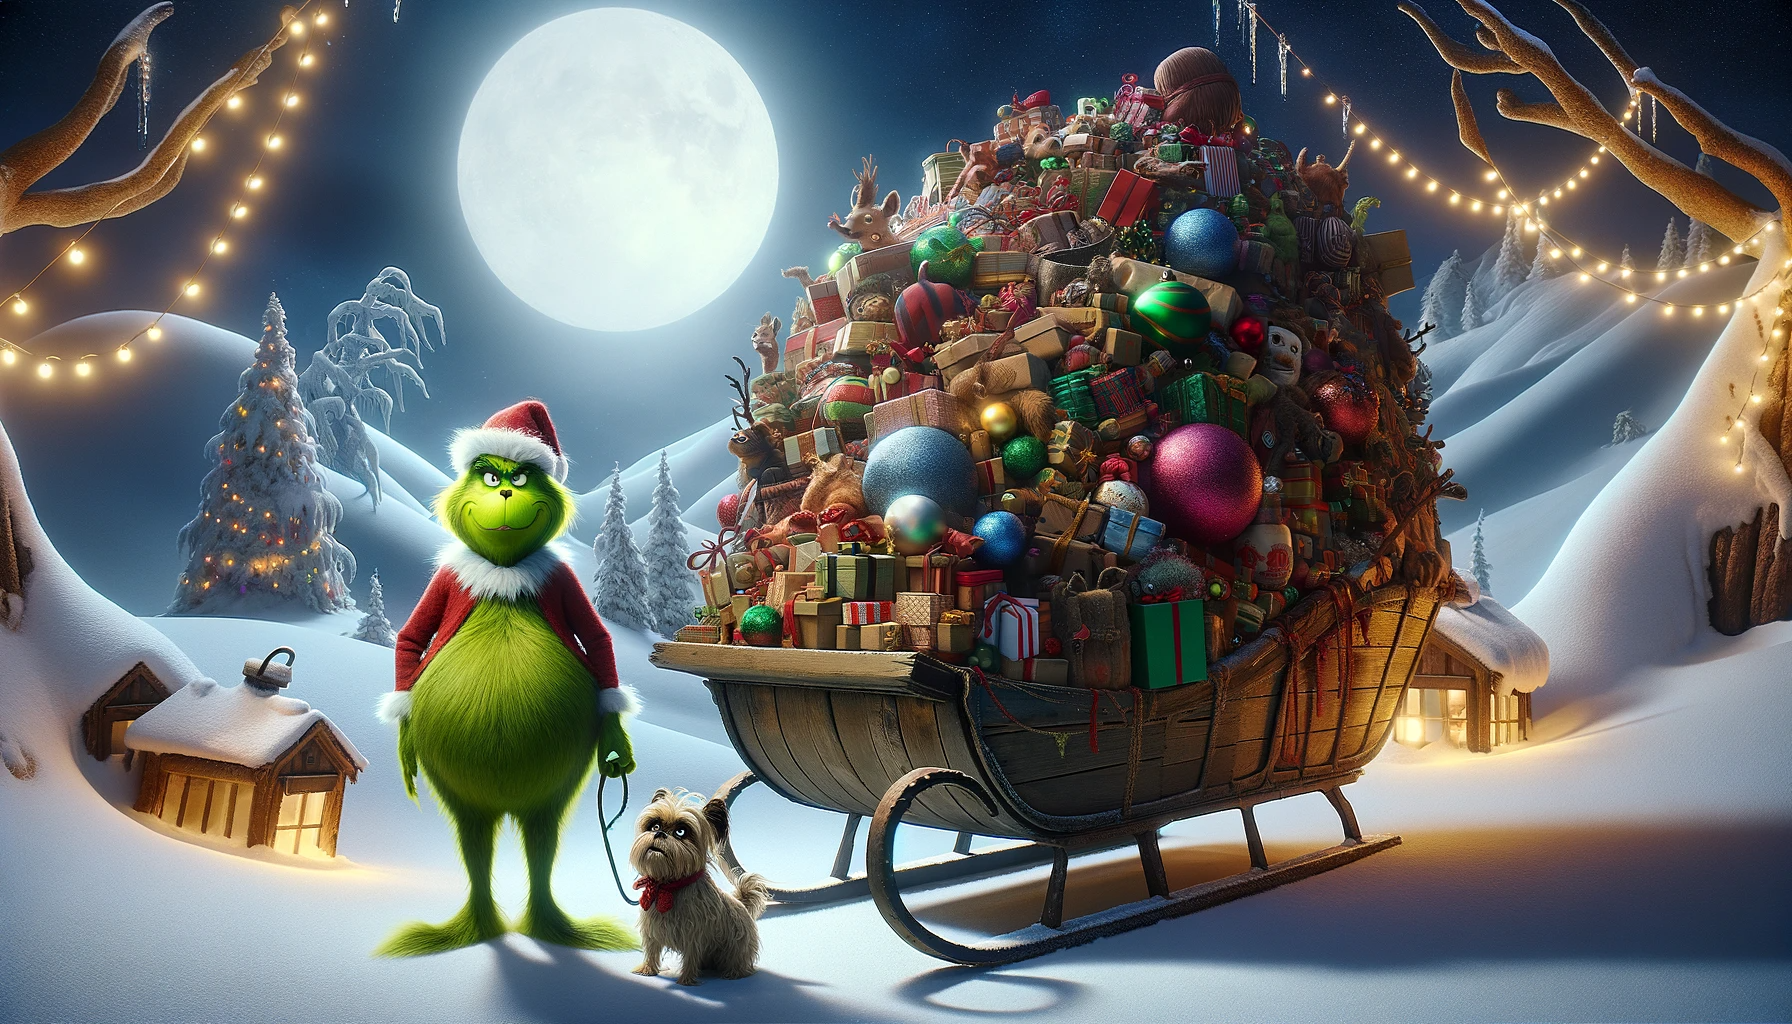 If the Grinch stole Christmas in 2023, it would be worth $14 million in Whoville goods